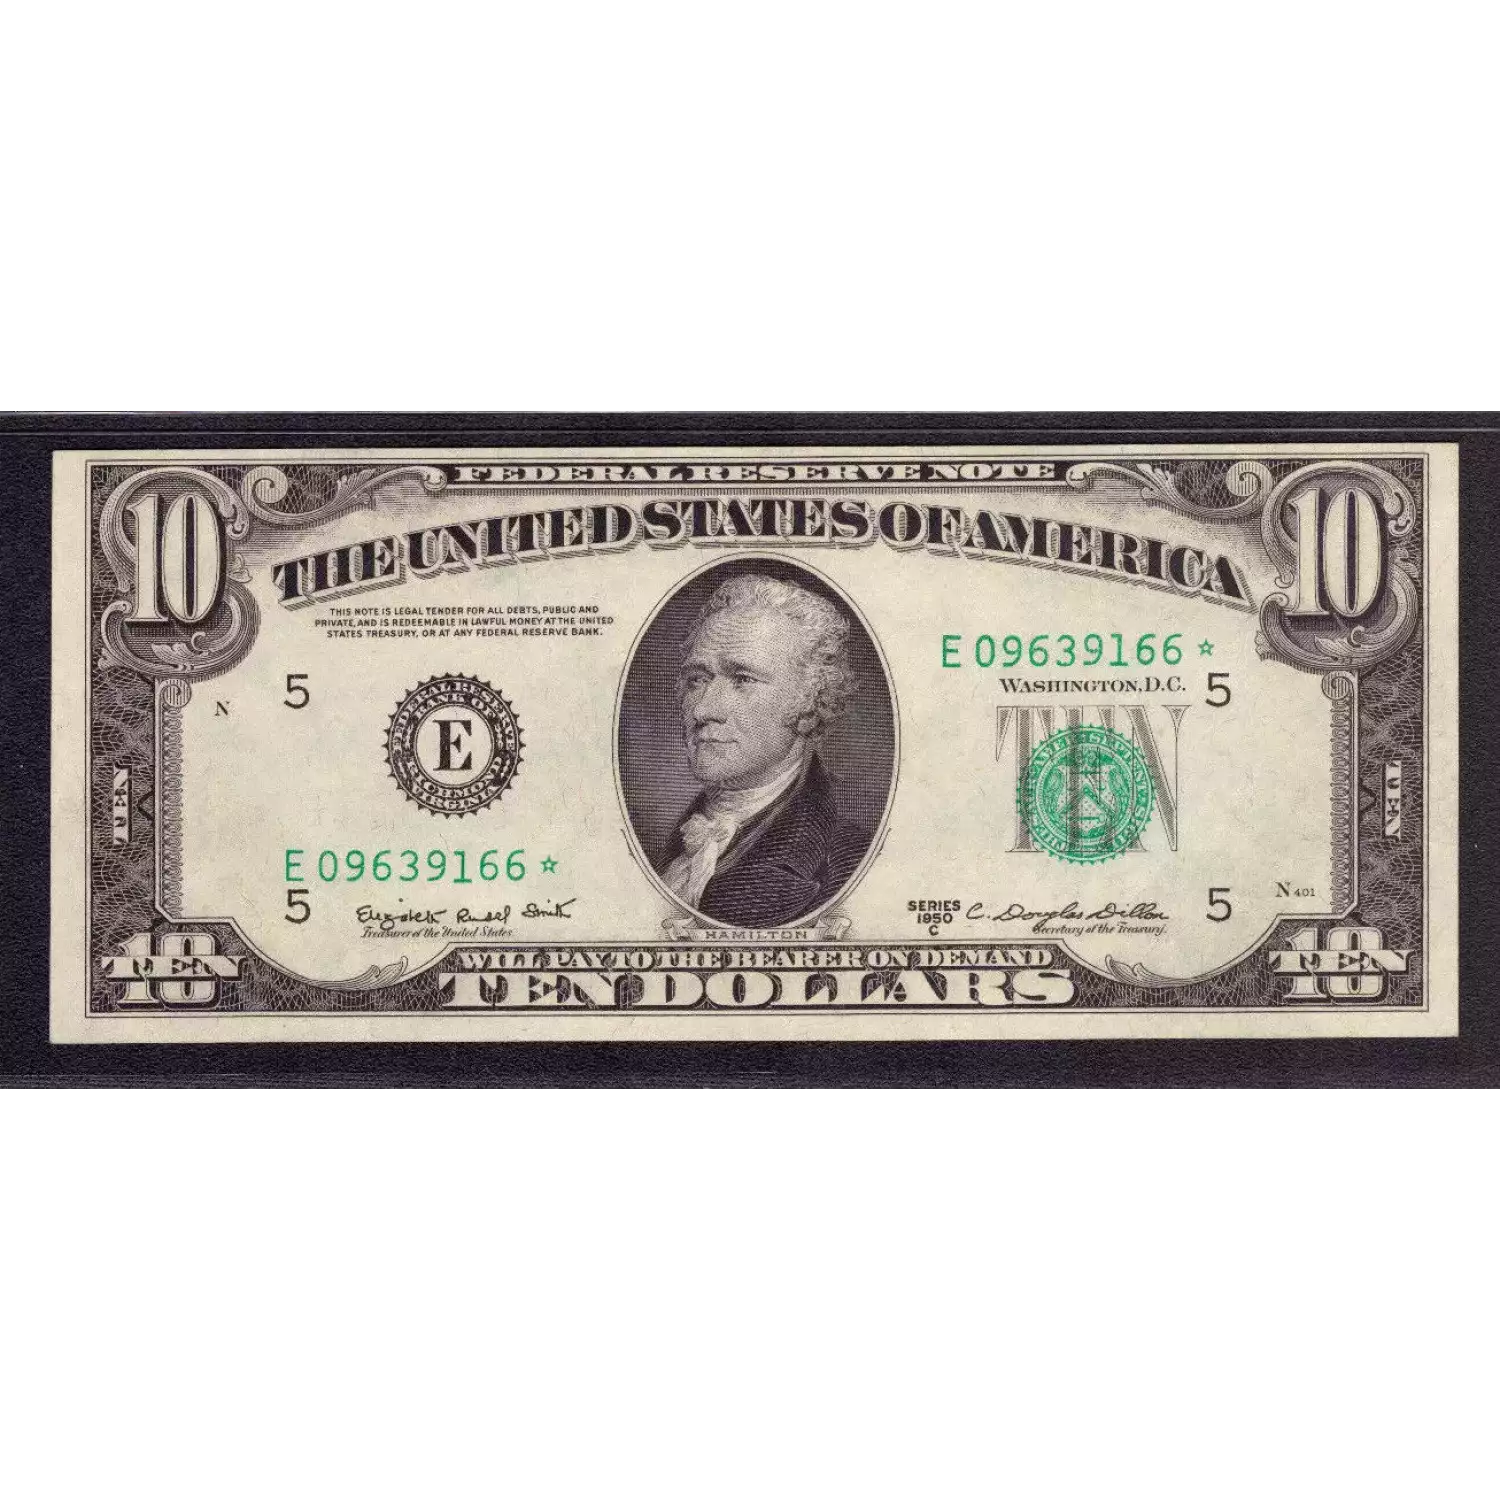 Federal Reserve Note Richmond (2)